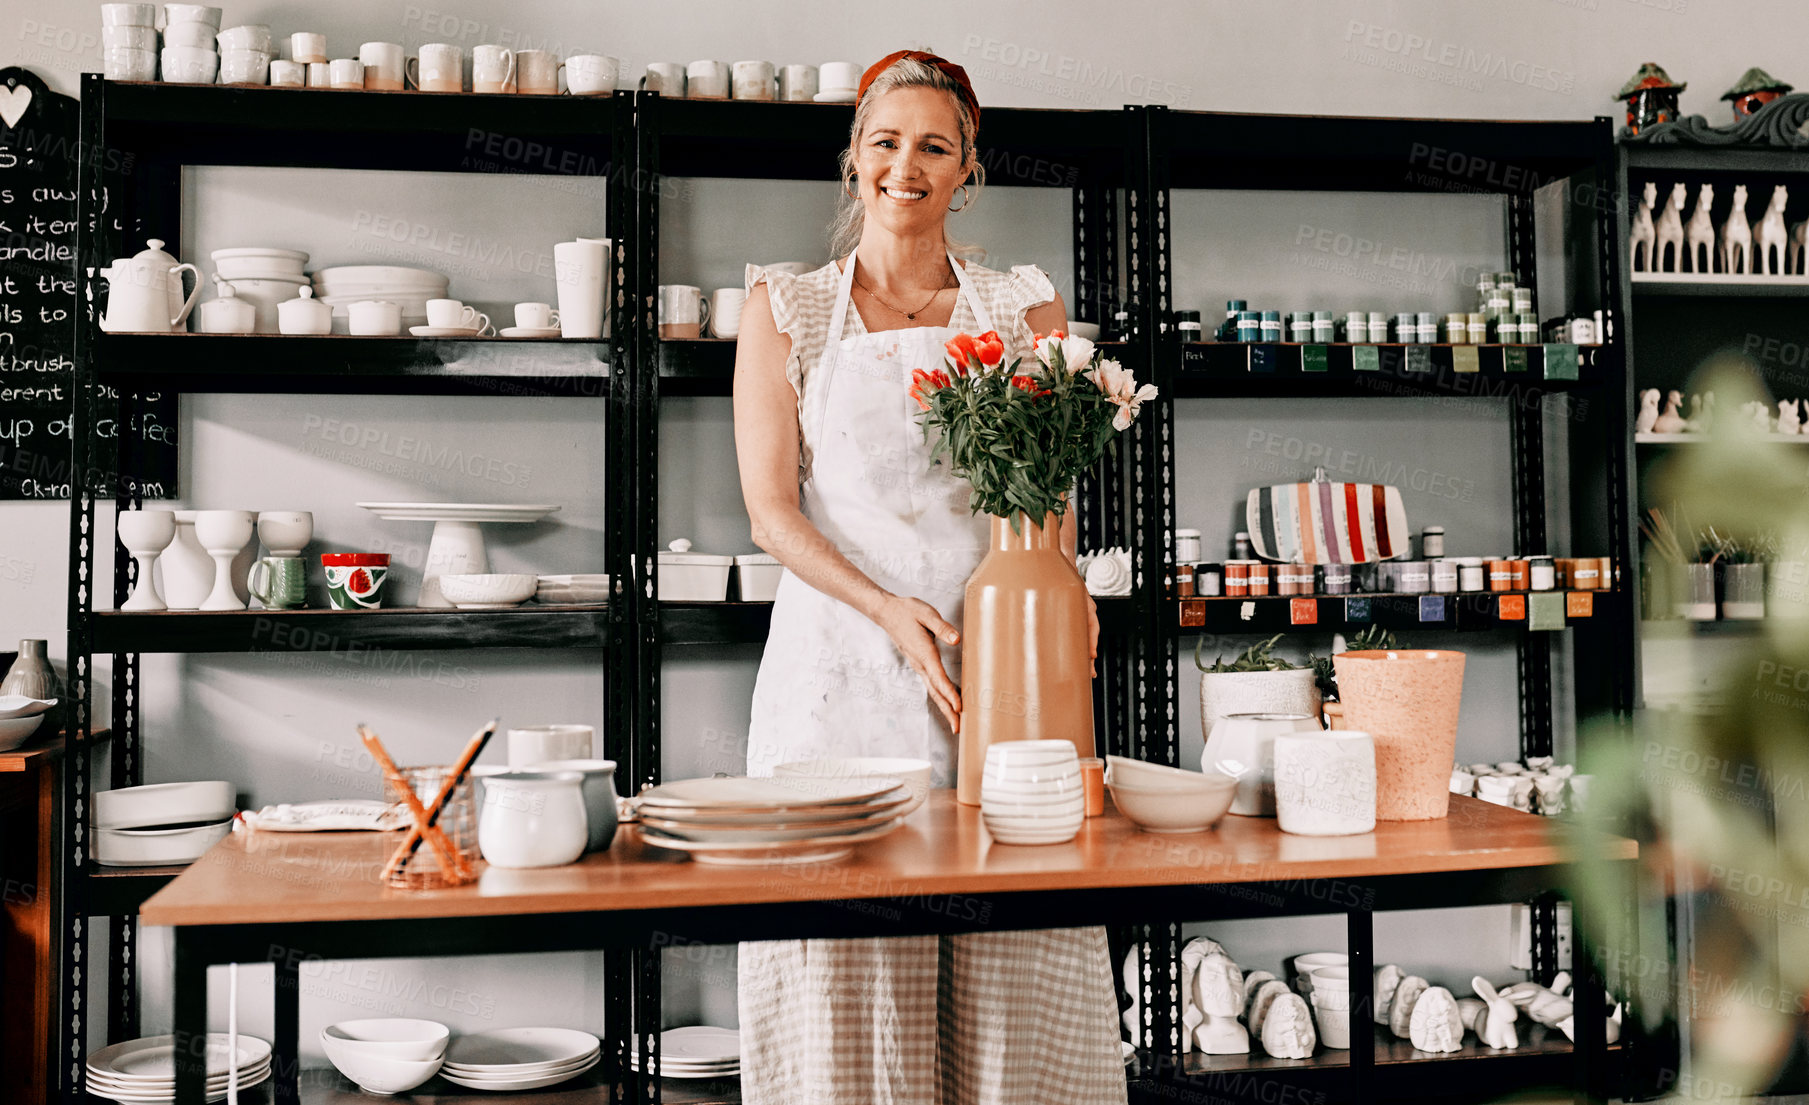 Buy stock photo Cropped portrait of an attractive mature woman standing alone and holding a handmade vase in her pottery workshop